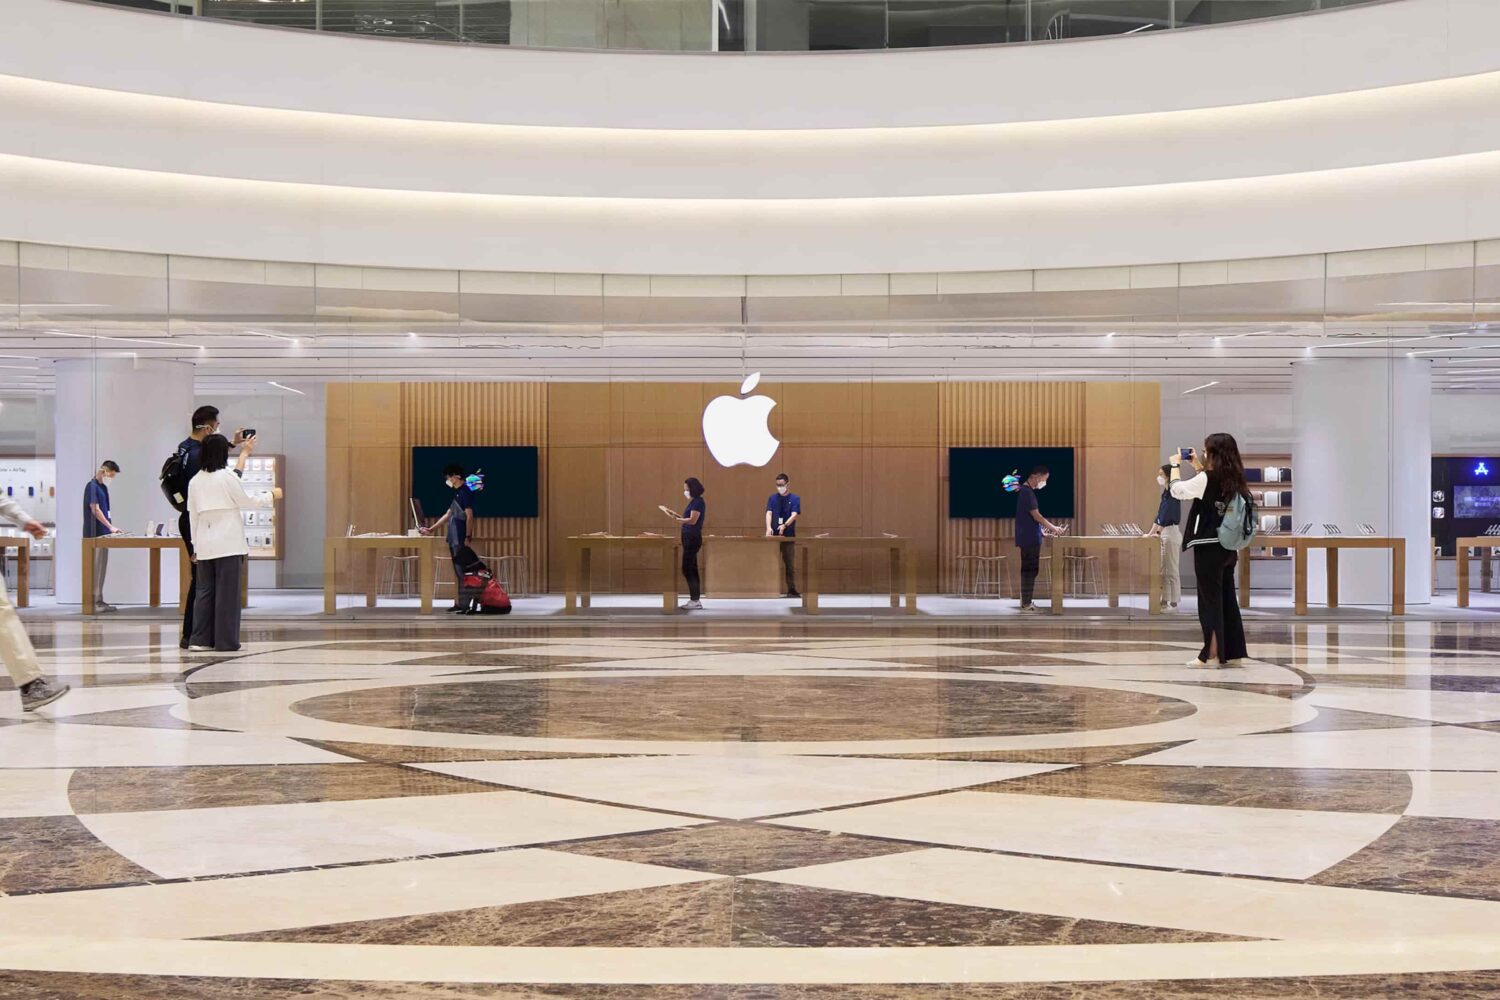 The interior of Apple Wuhan, the company's first store in China's Hubei Province and its 54th retail location in Greater China, is shown in this press photo from Apple, featuring granite floors and wood walls which make the interior brighter and transparent